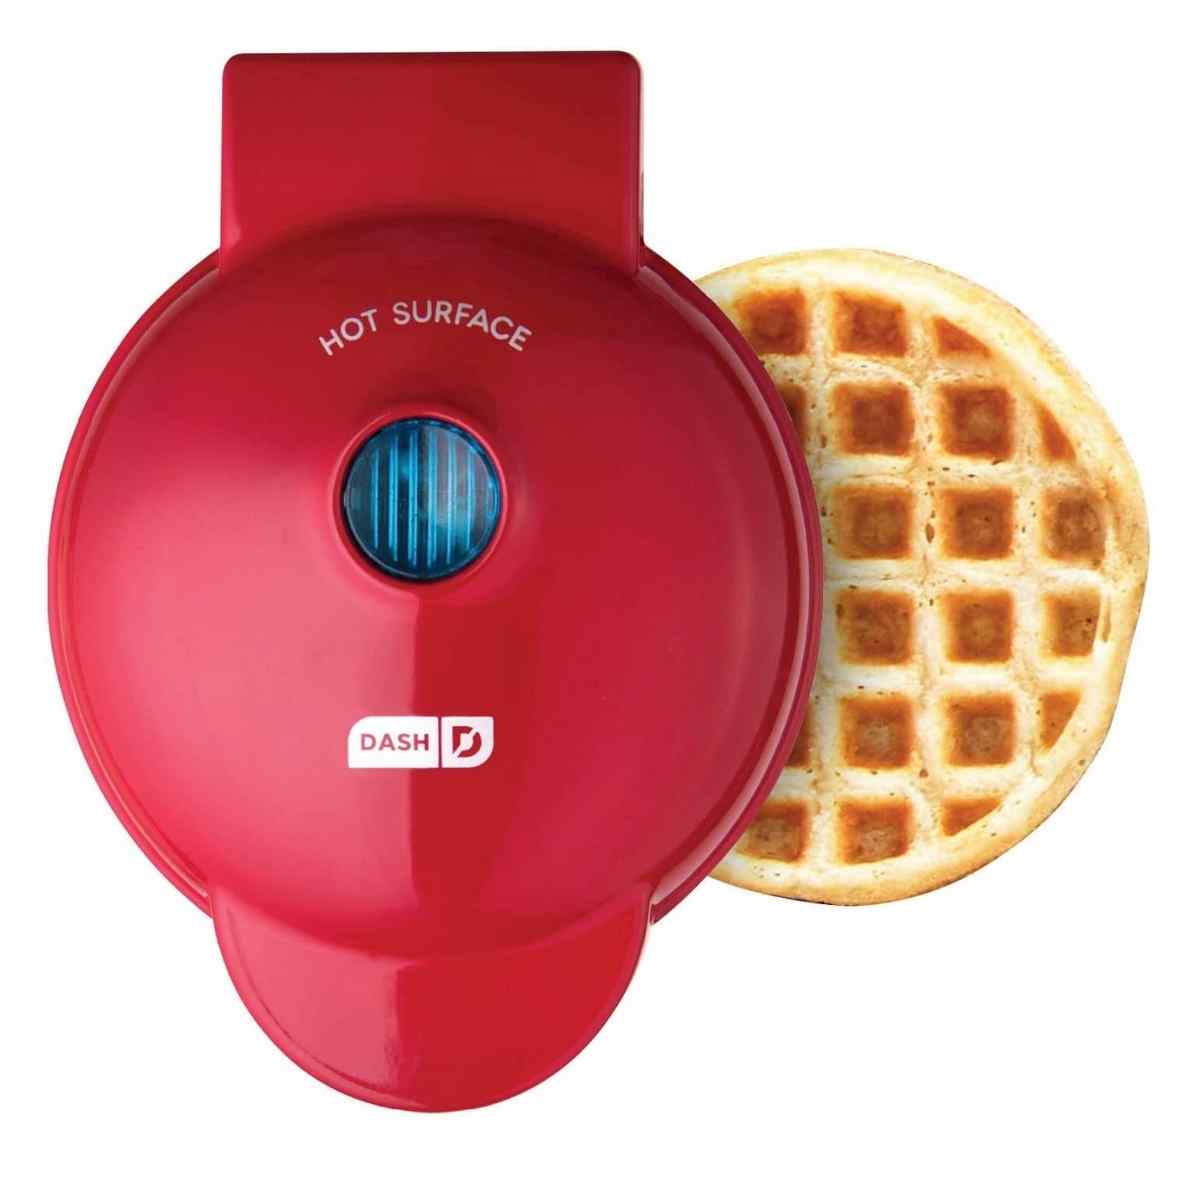 Dash Mini Waffle maker down to $9.99 (17+ in other colors) - Smart Savers